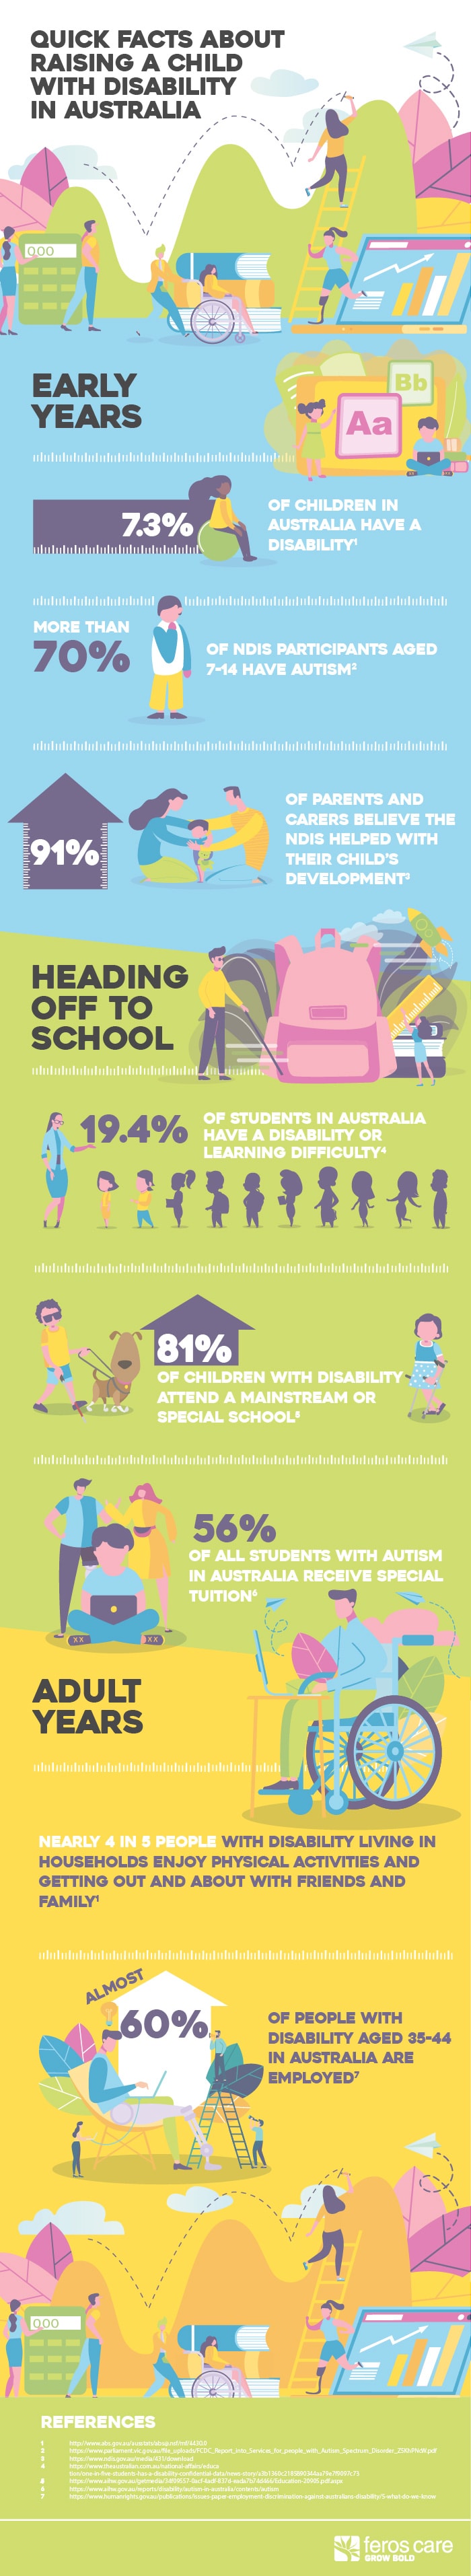 Parenting a child with disability informative infographic